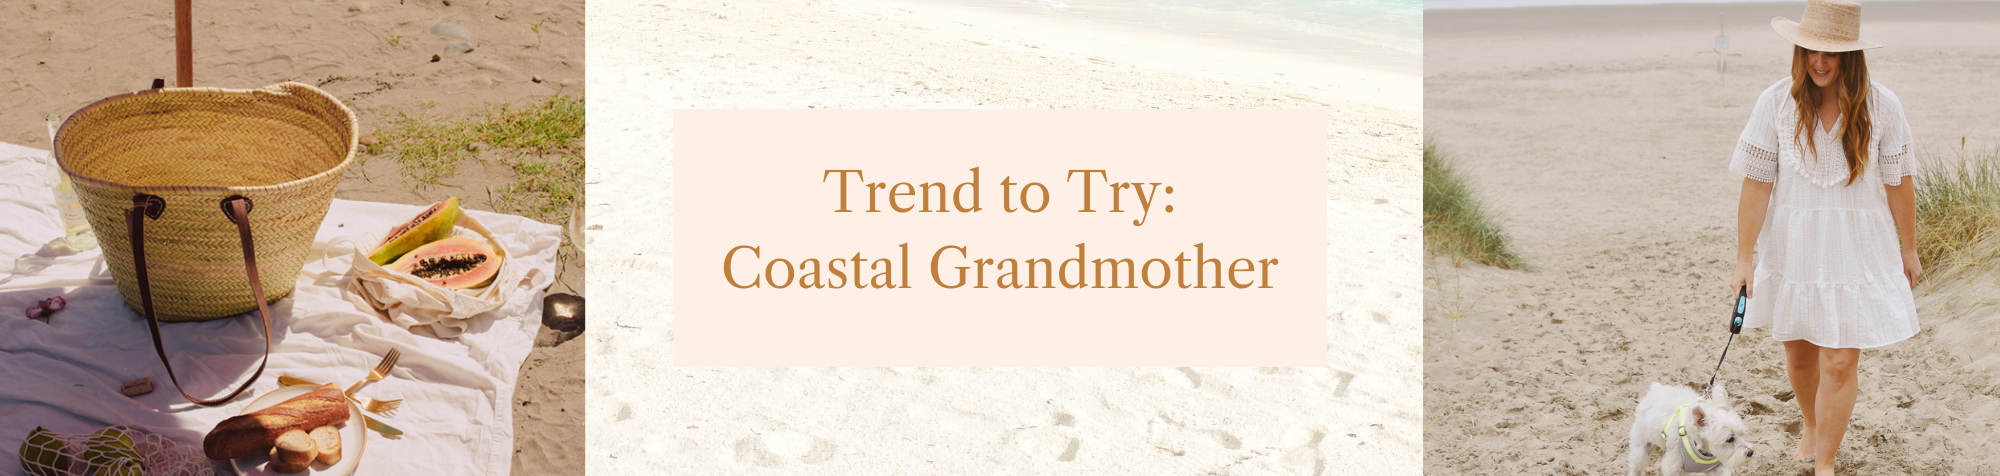 Trend to Try: Coastal Grandmother